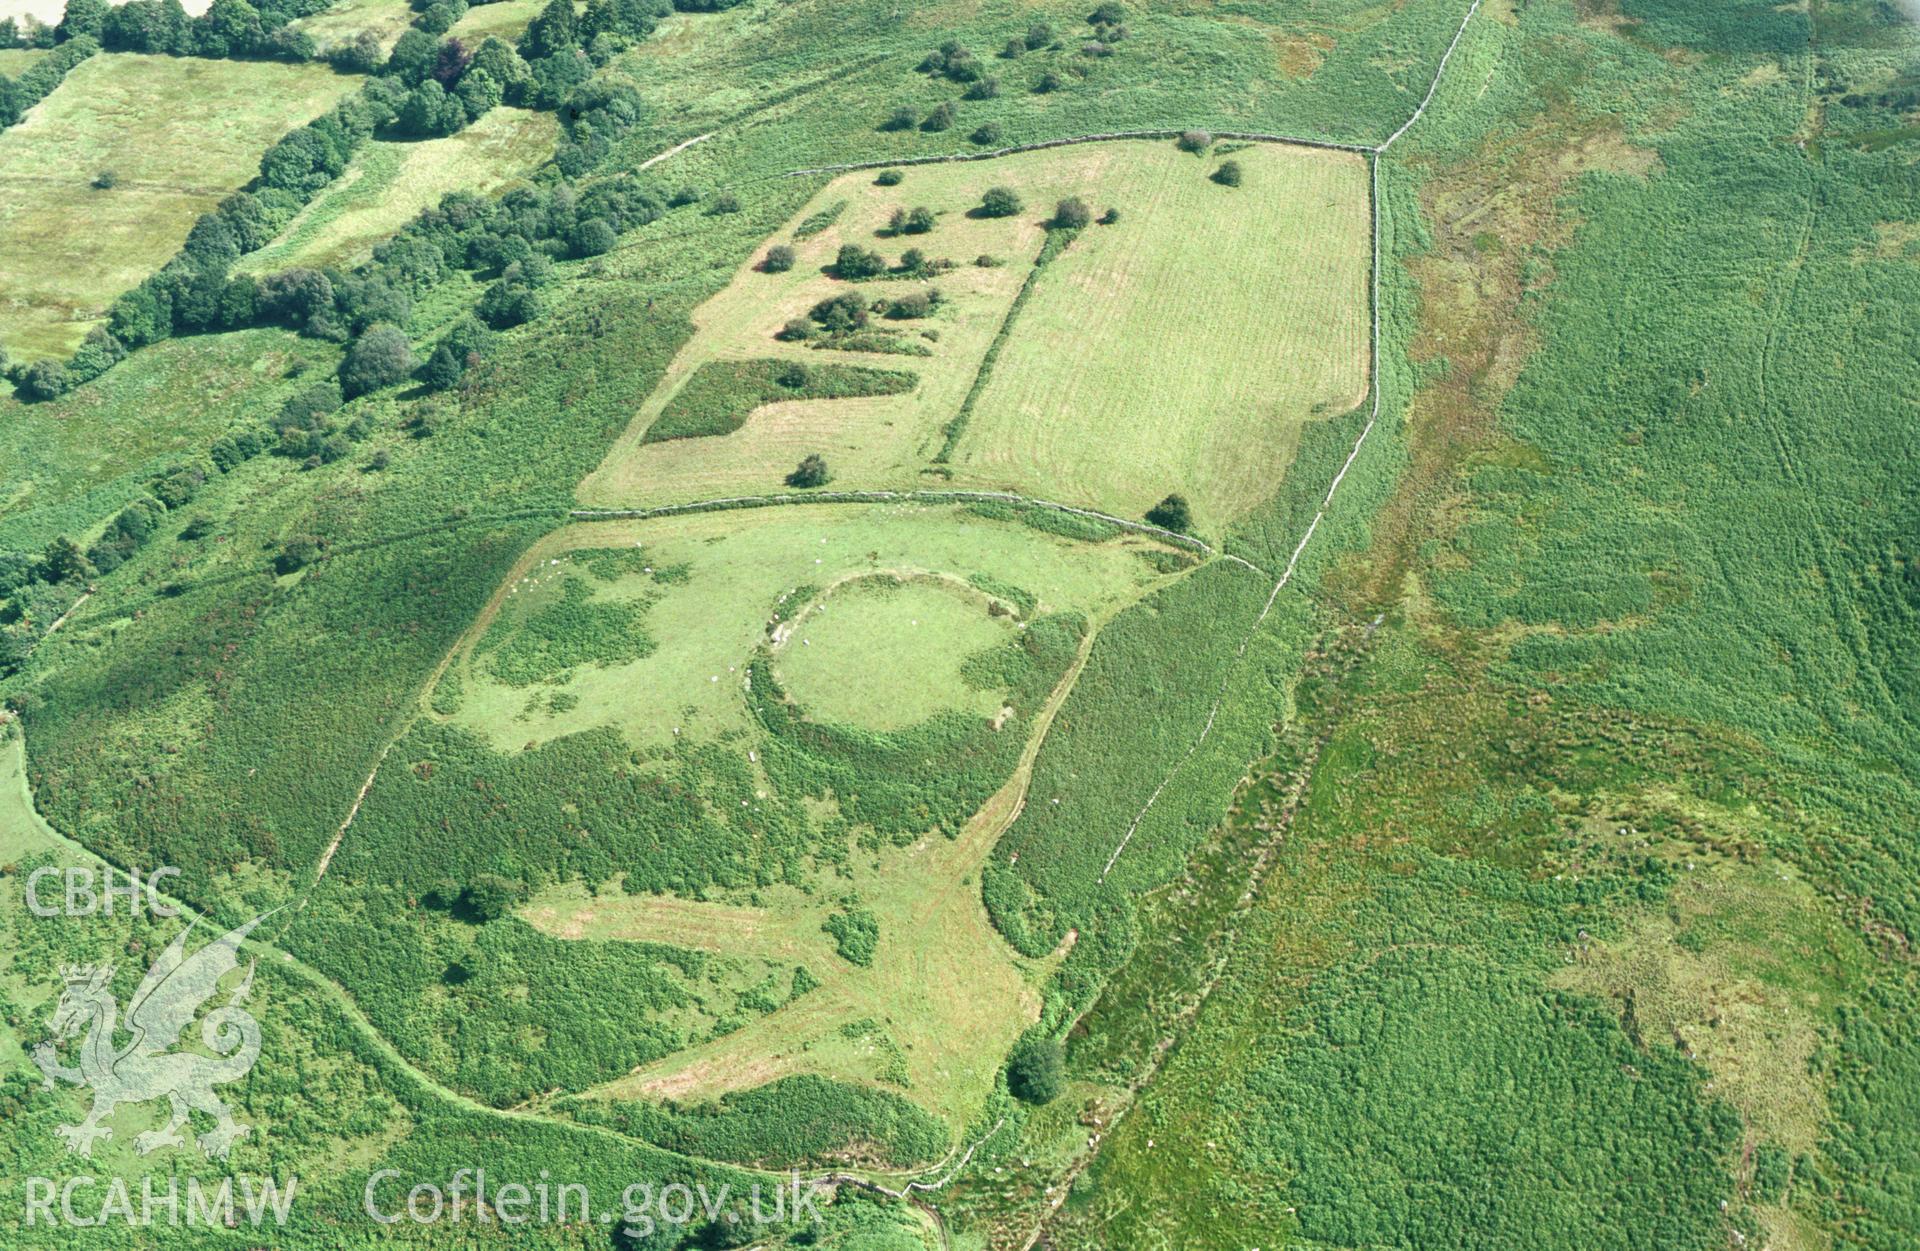 Slide of RCAHMW colour oblique aerial photograph of the enclosure at Gardden enclosure, Llanerfyl aken by T.G. Driver, 2001.